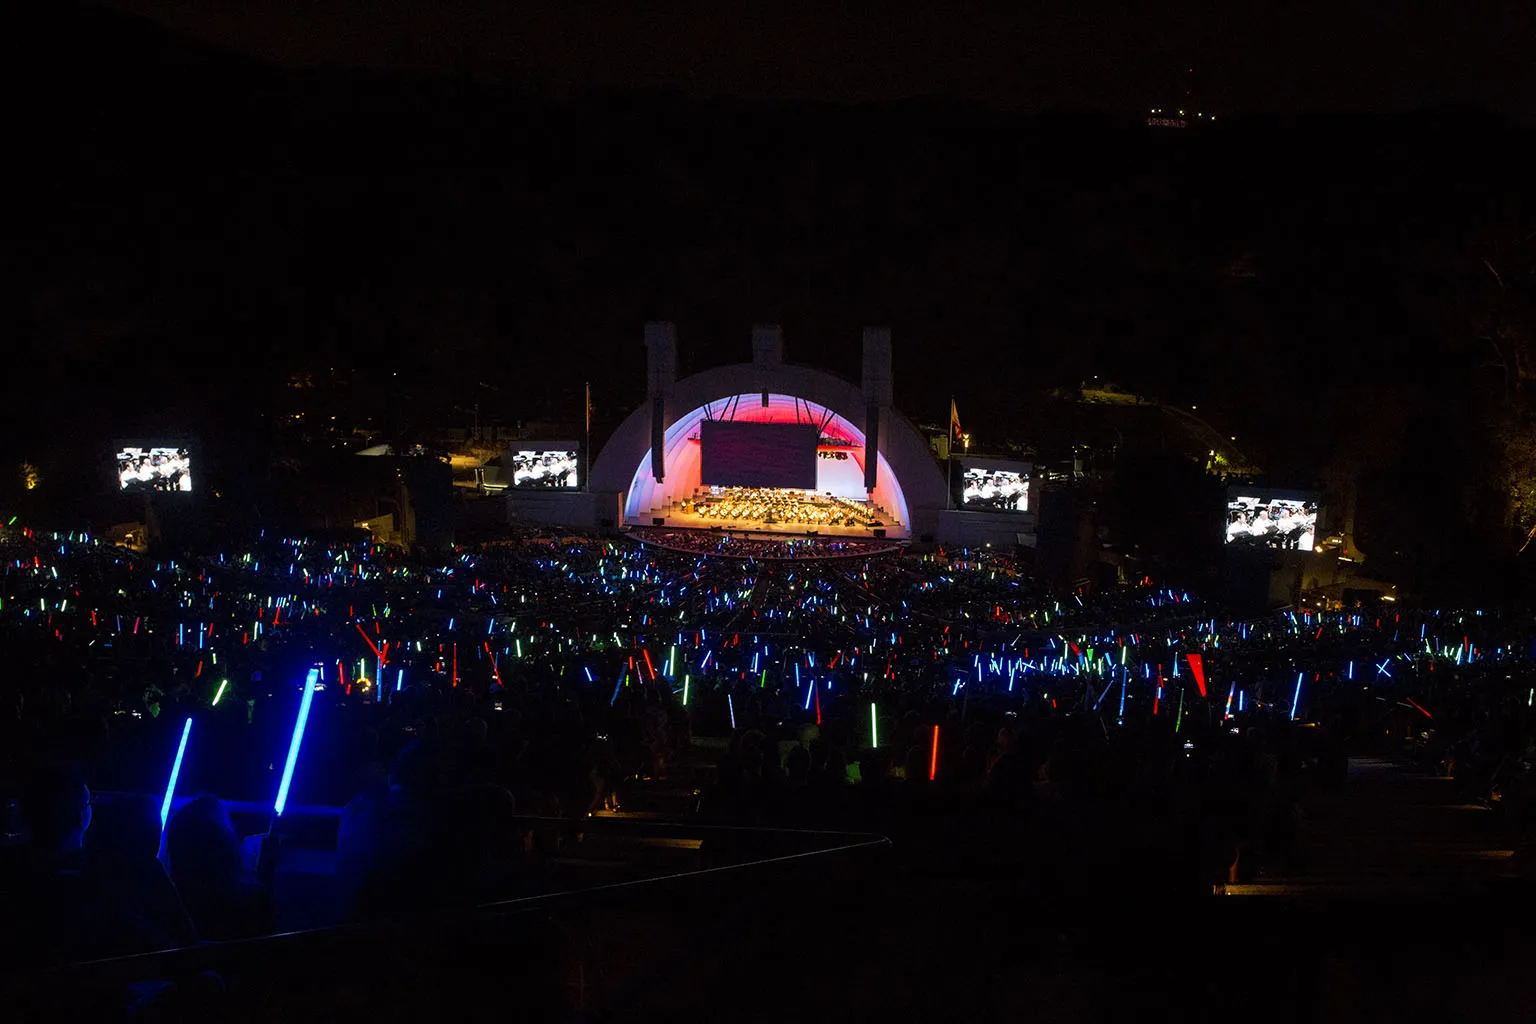 Jedi convention at the Hollywood Bowl